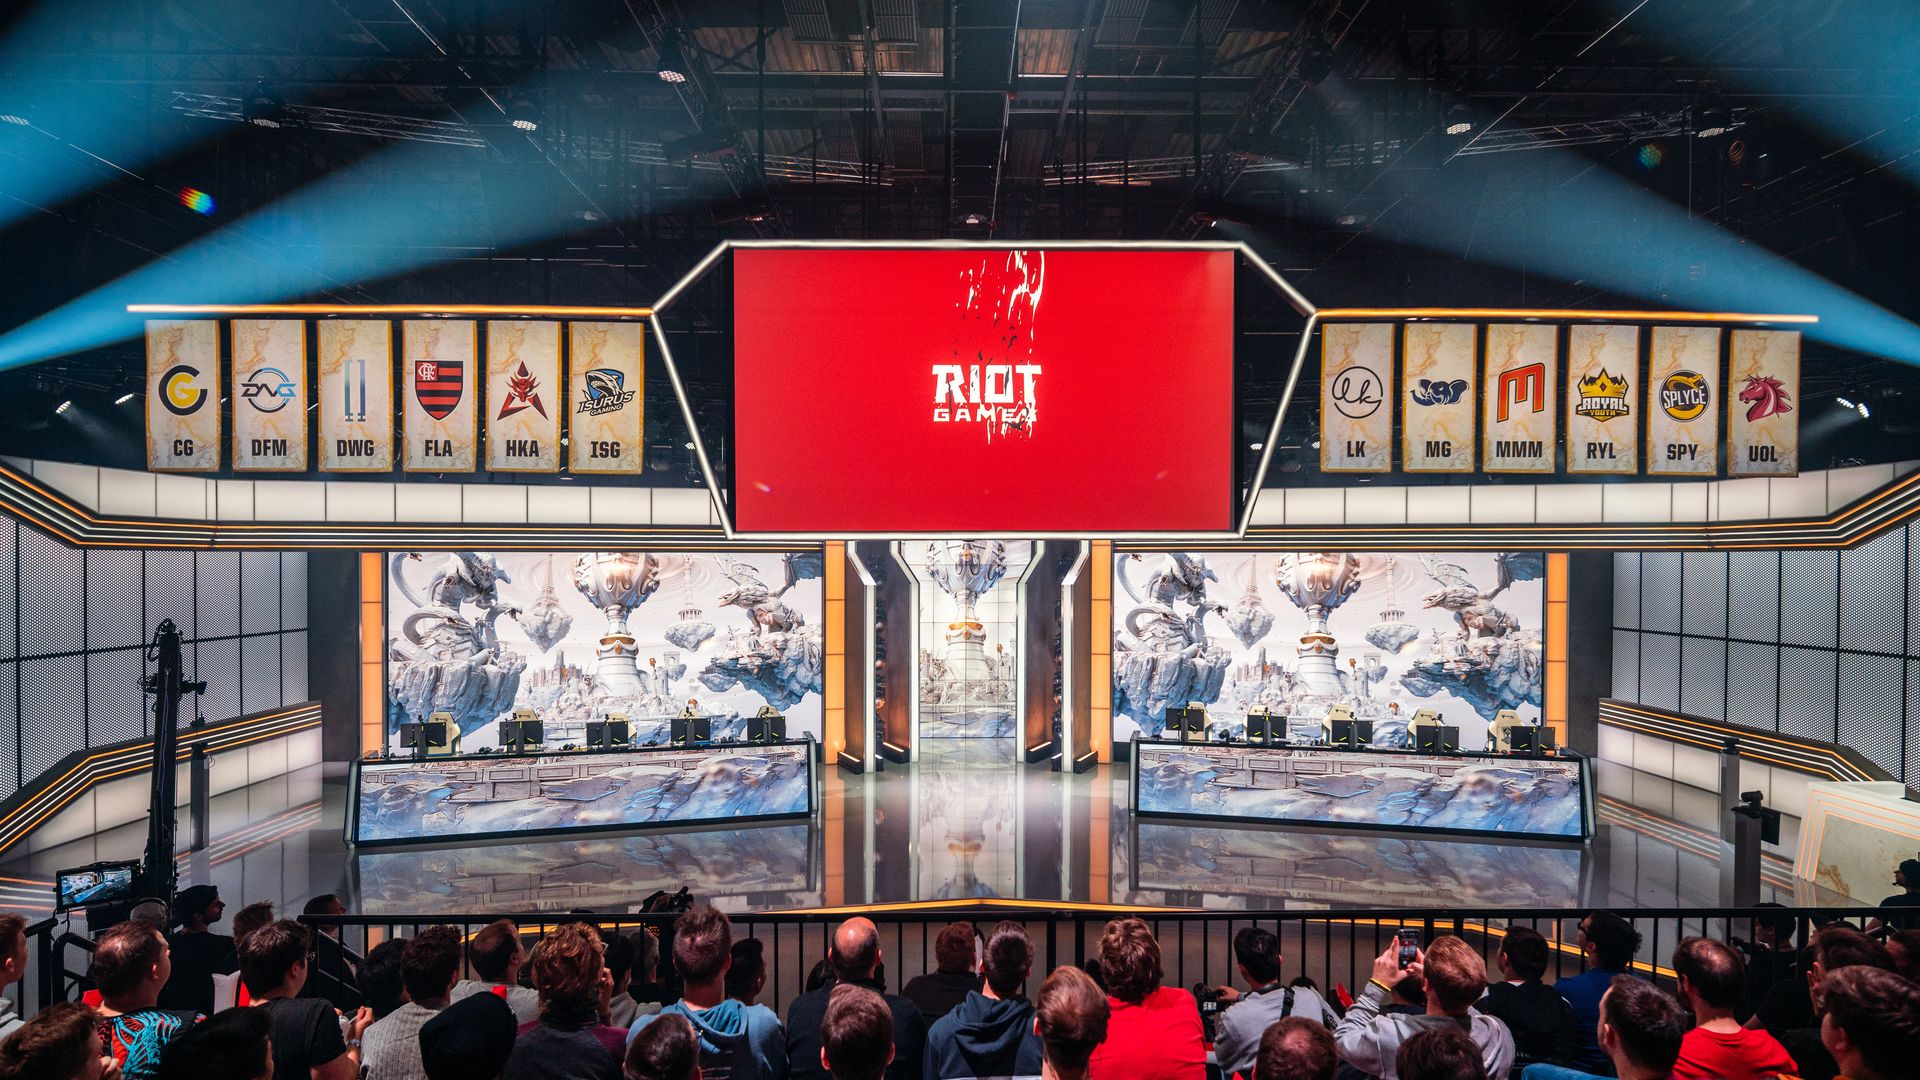 The Riot Games logo on display.